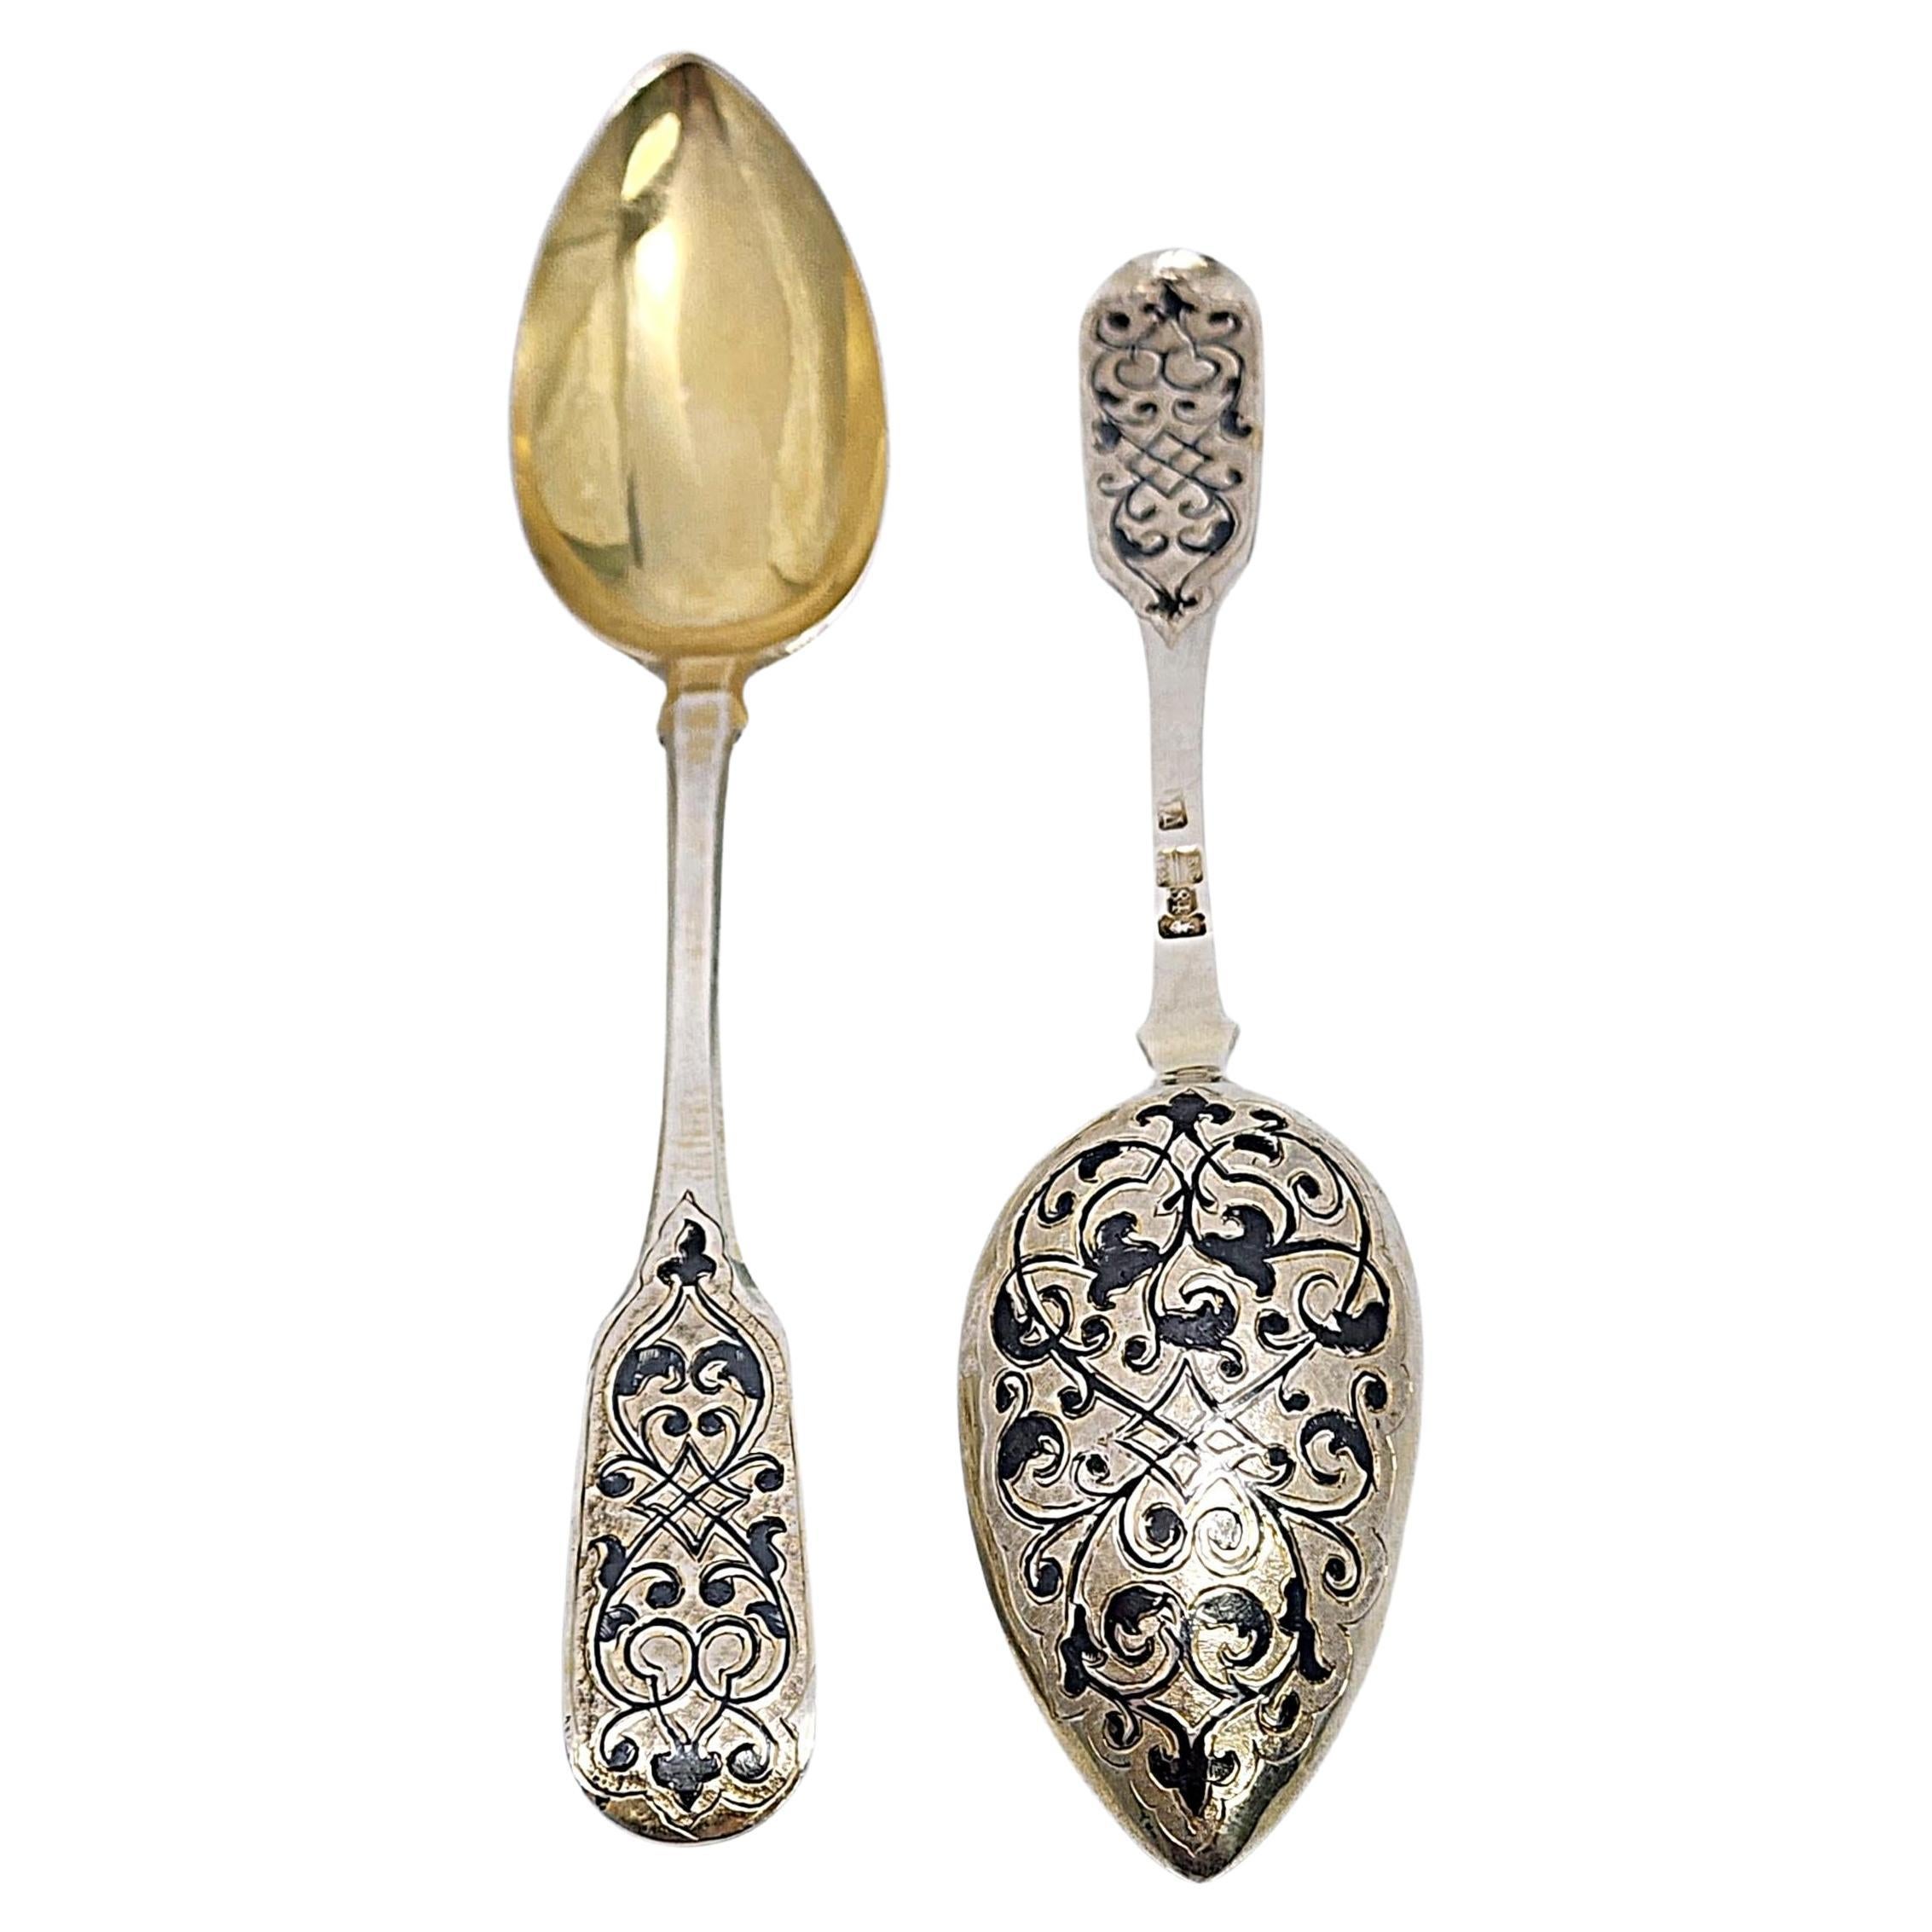 Set of 2 Russian 84 Zolotnik Imperial Silver Gold Wash and Enamel Spoons #16819 For Sale